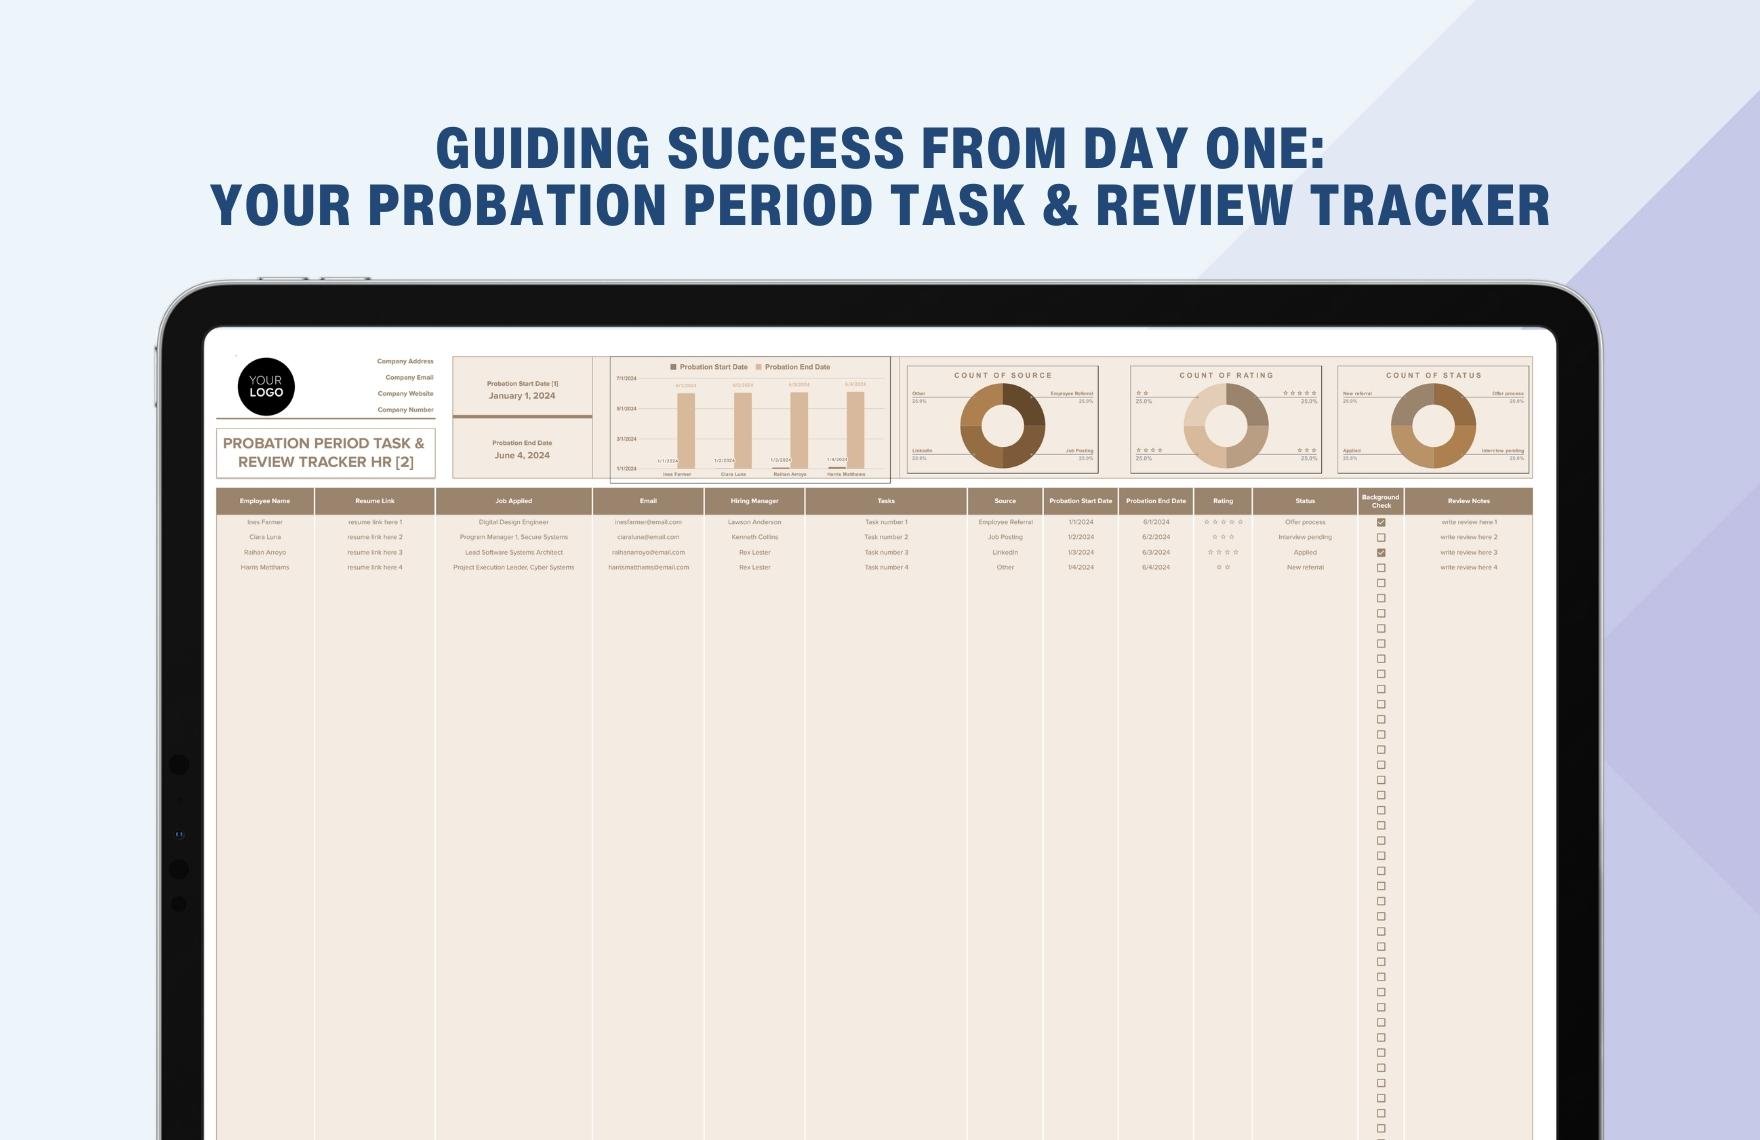 Probation Period Task & Review Tracker HR Template